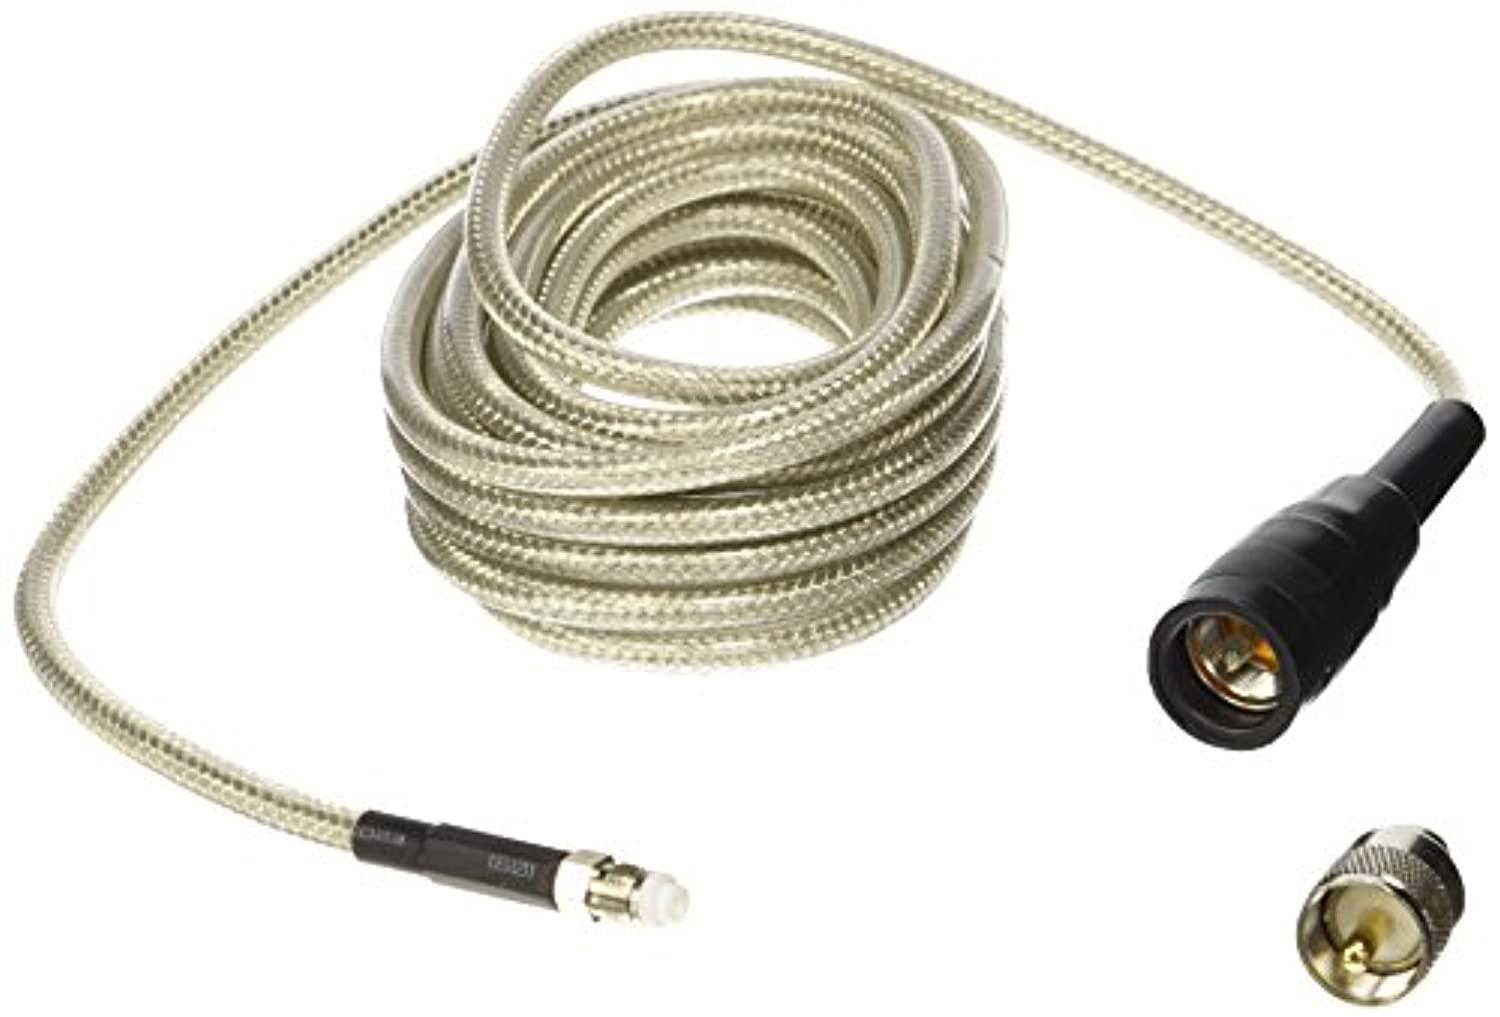 Wilson Antennas 18-Foot Coax Cable with PL-259 Connectors 305-830 - CB Coax Cable Mini R8 with FME Connector and Boot